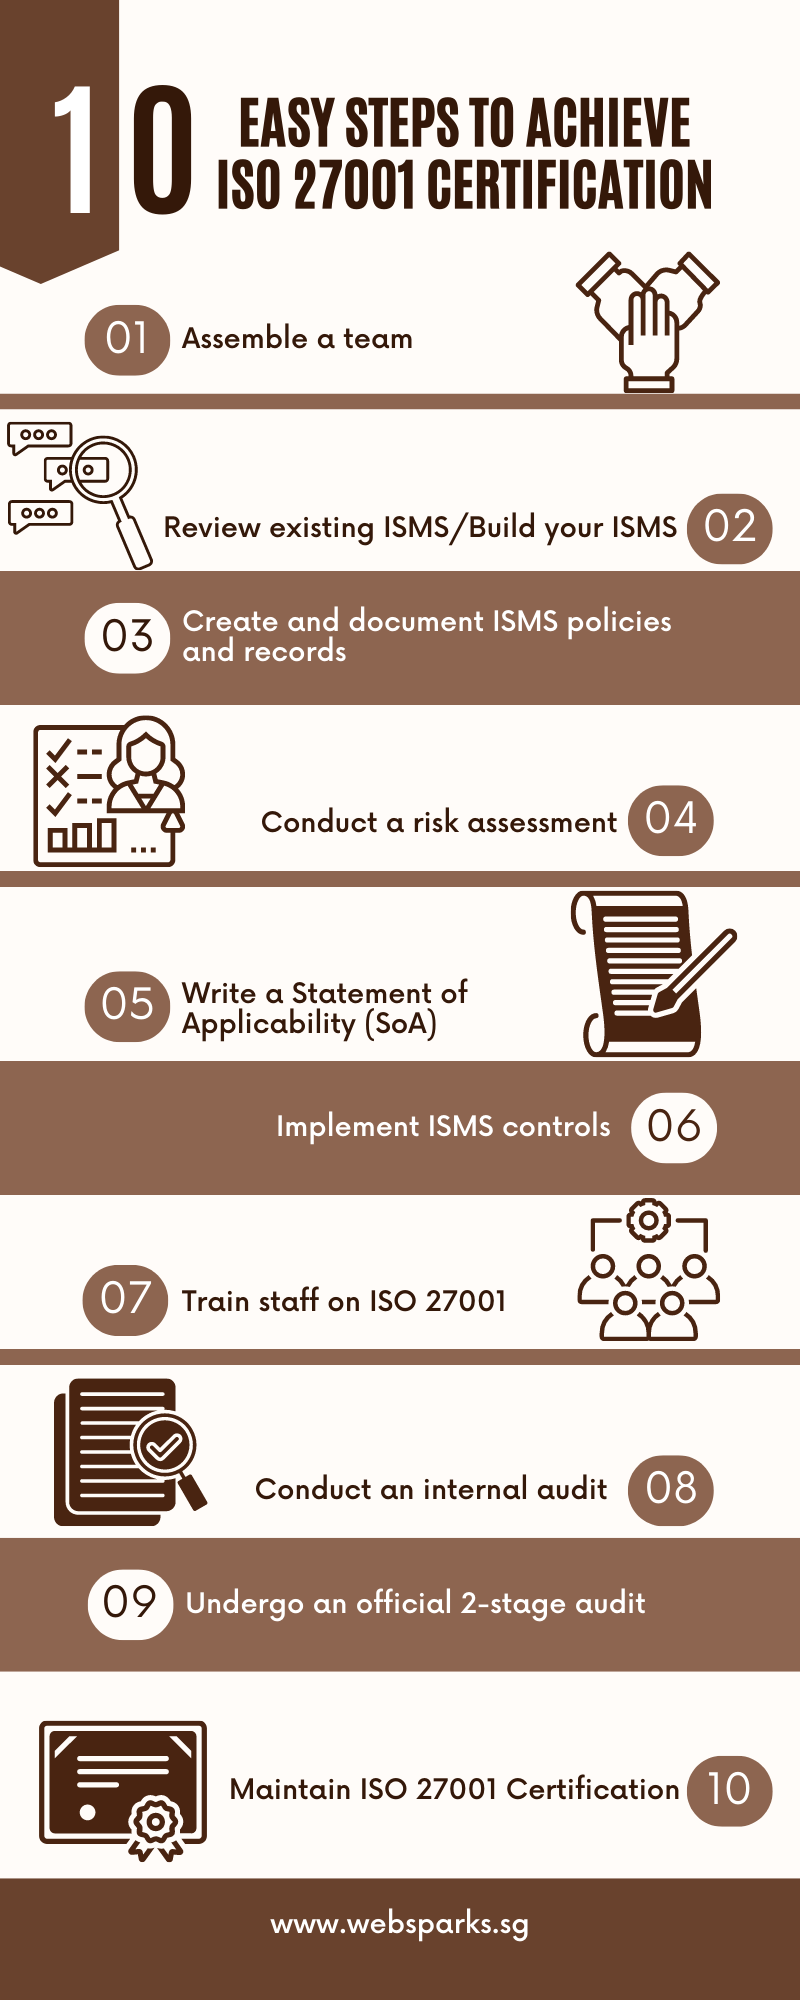 infographics on 10 easy steps to achieve ISO 27001 certification